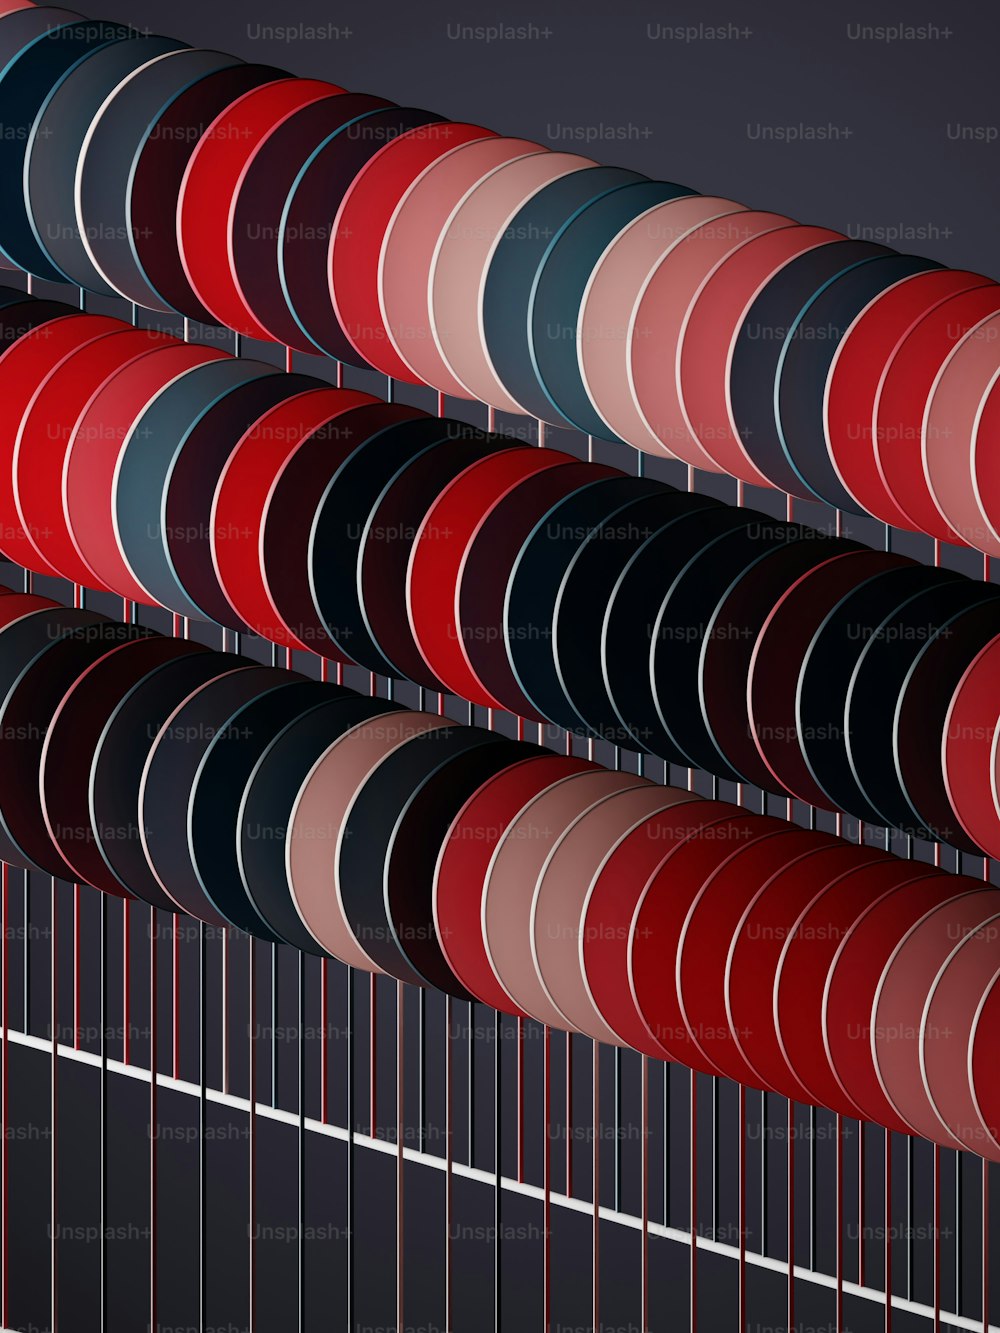 a group of red, black, and blue circles hanging from a metal rod